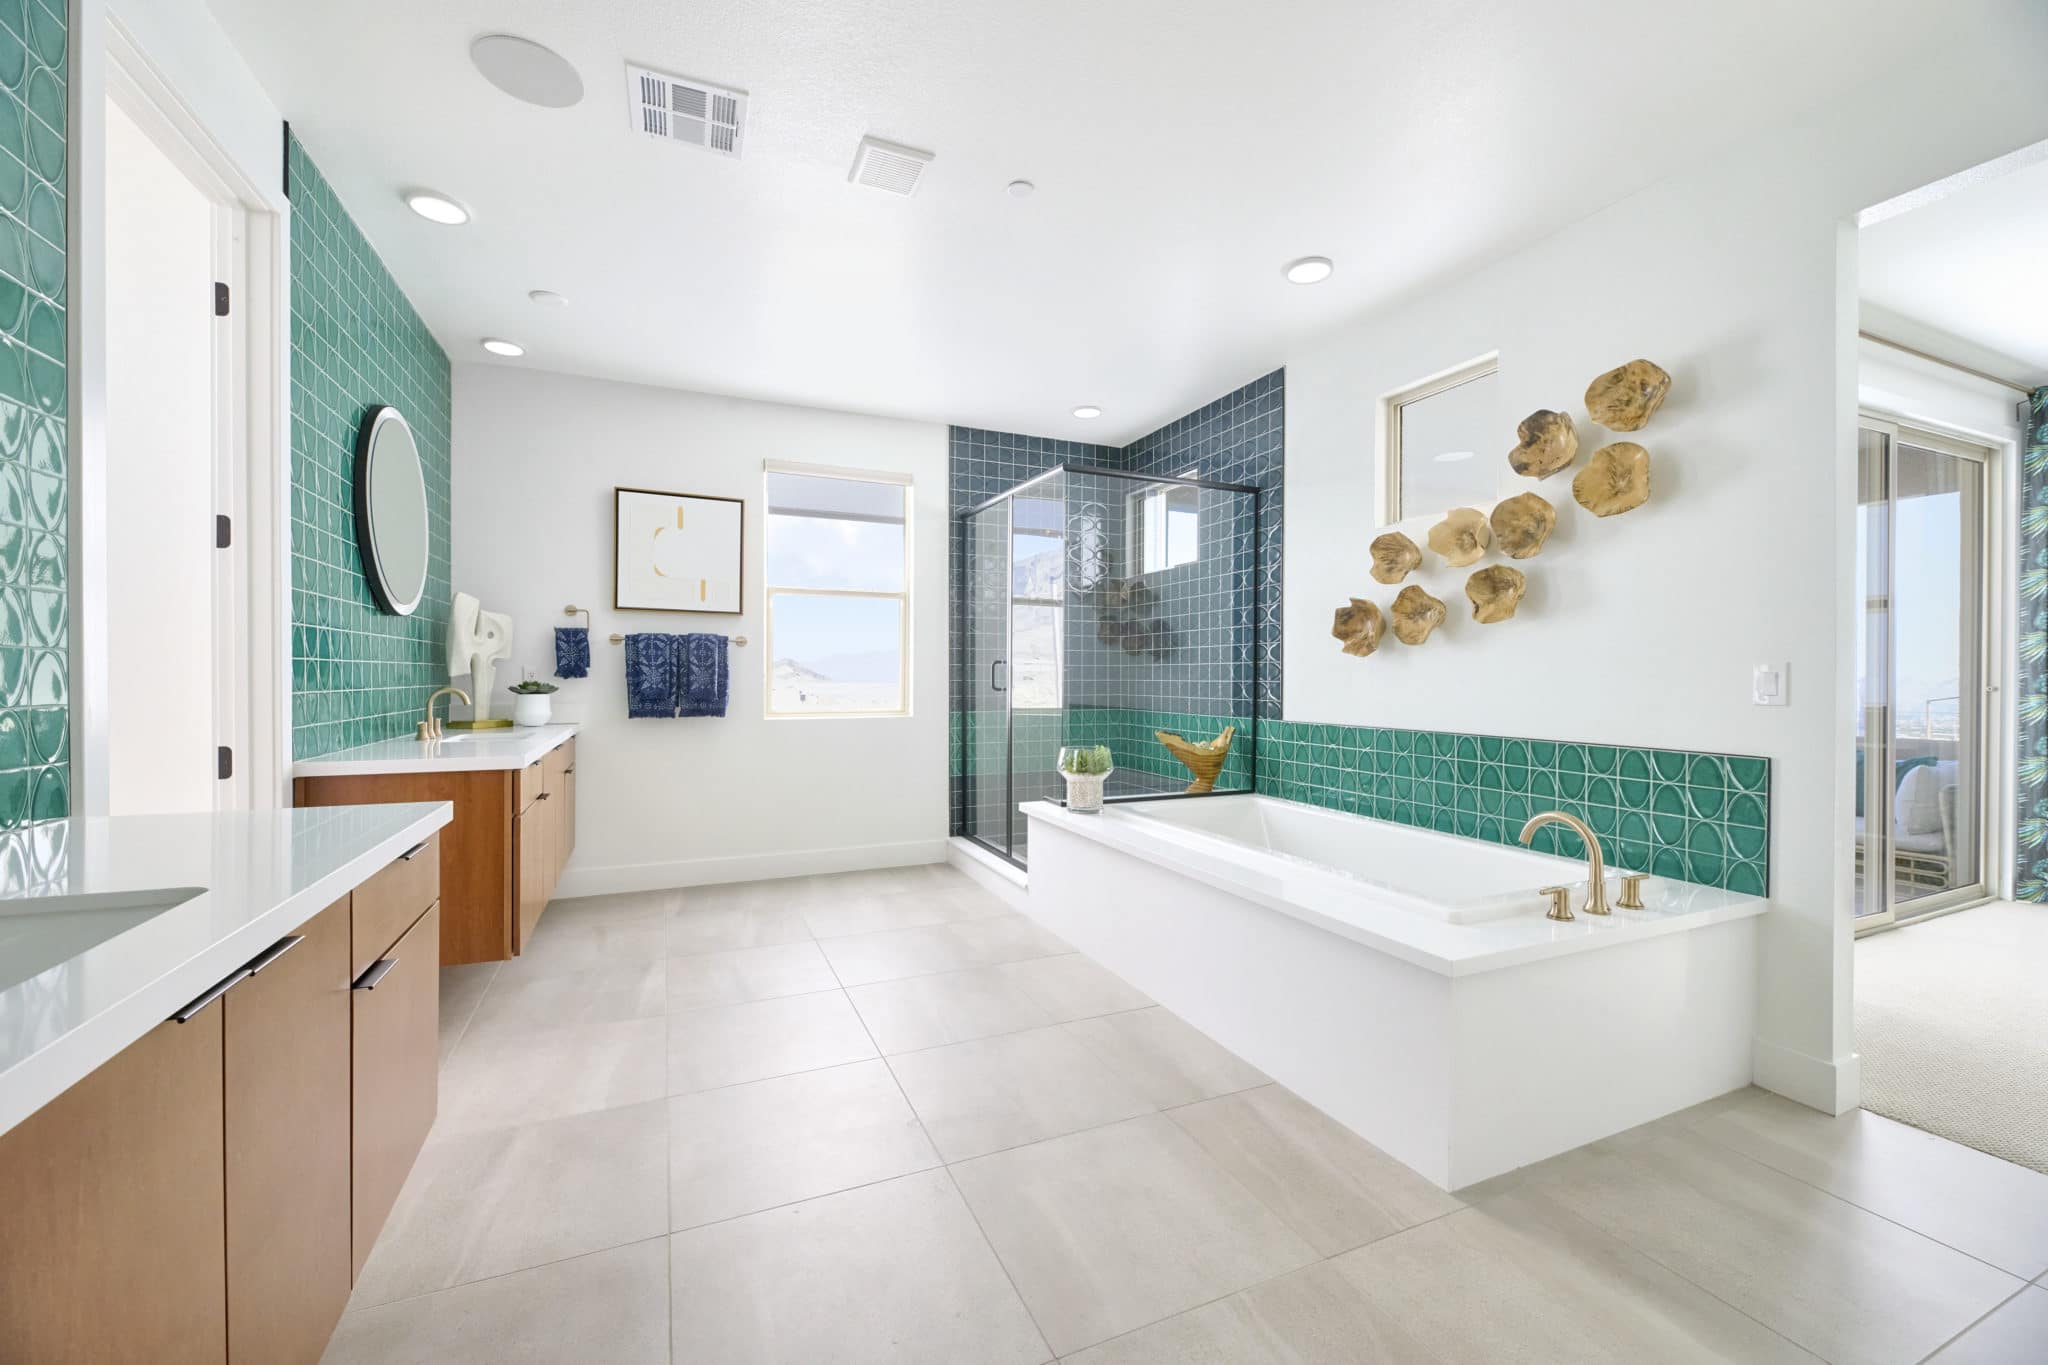 Primary Bathroom of Plan 3 at Kings Canyon by Tri Pointe Homes